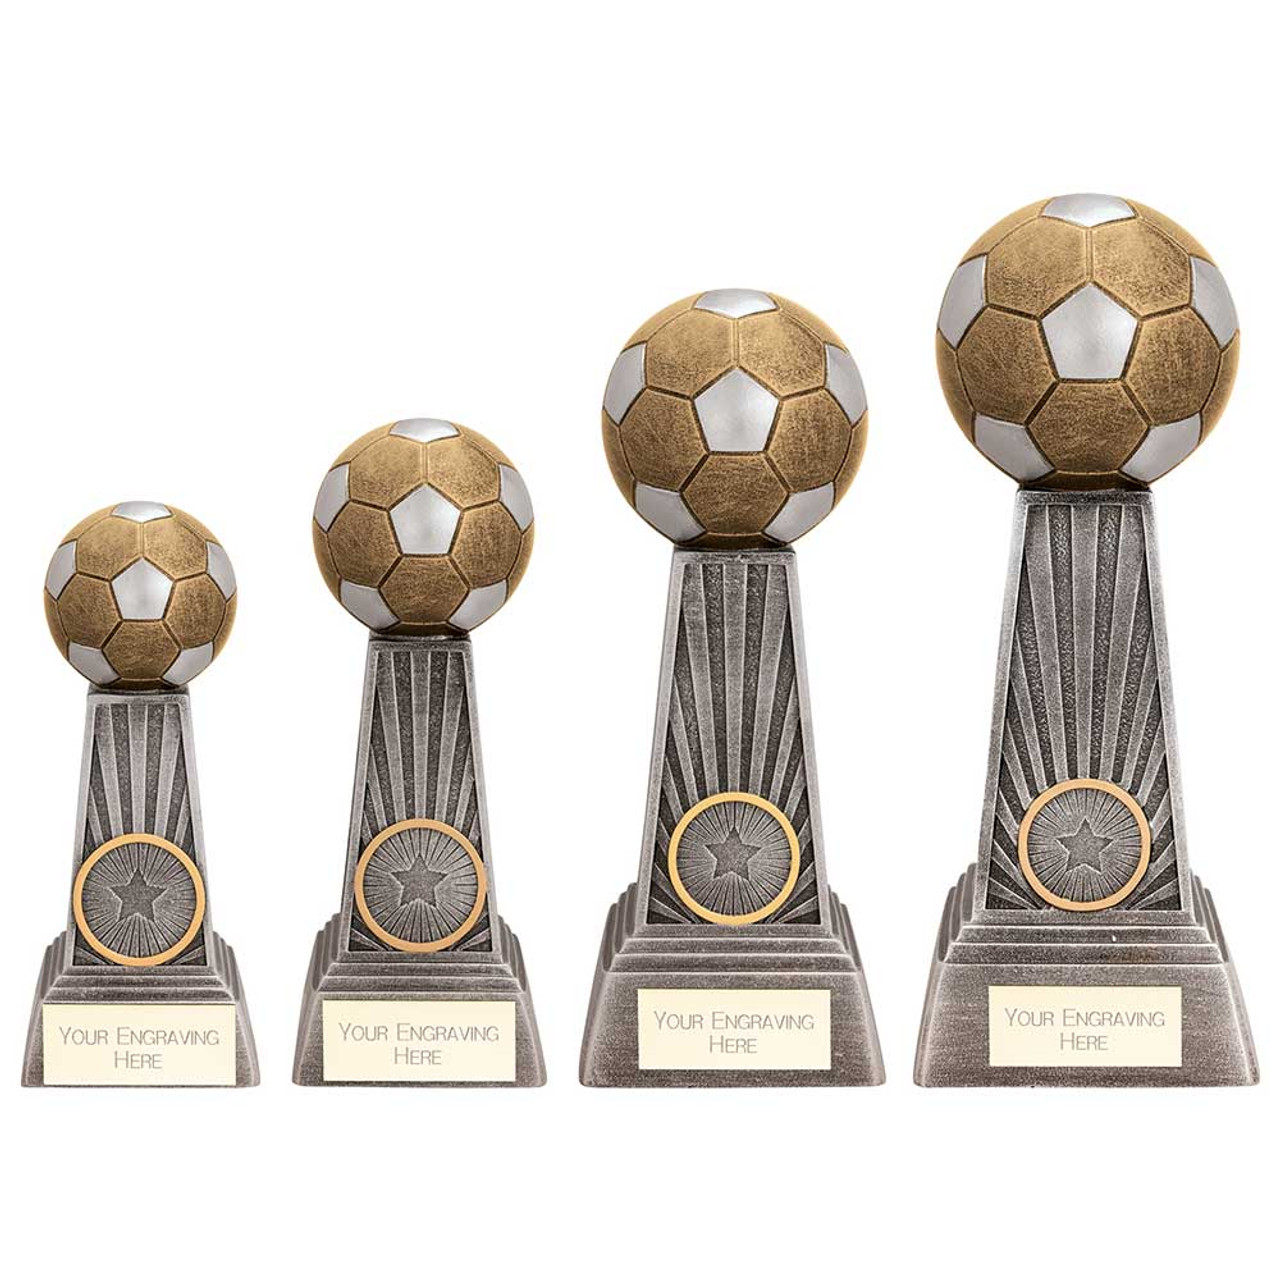 ENERGY Football Competition Trophy in 4 sizes